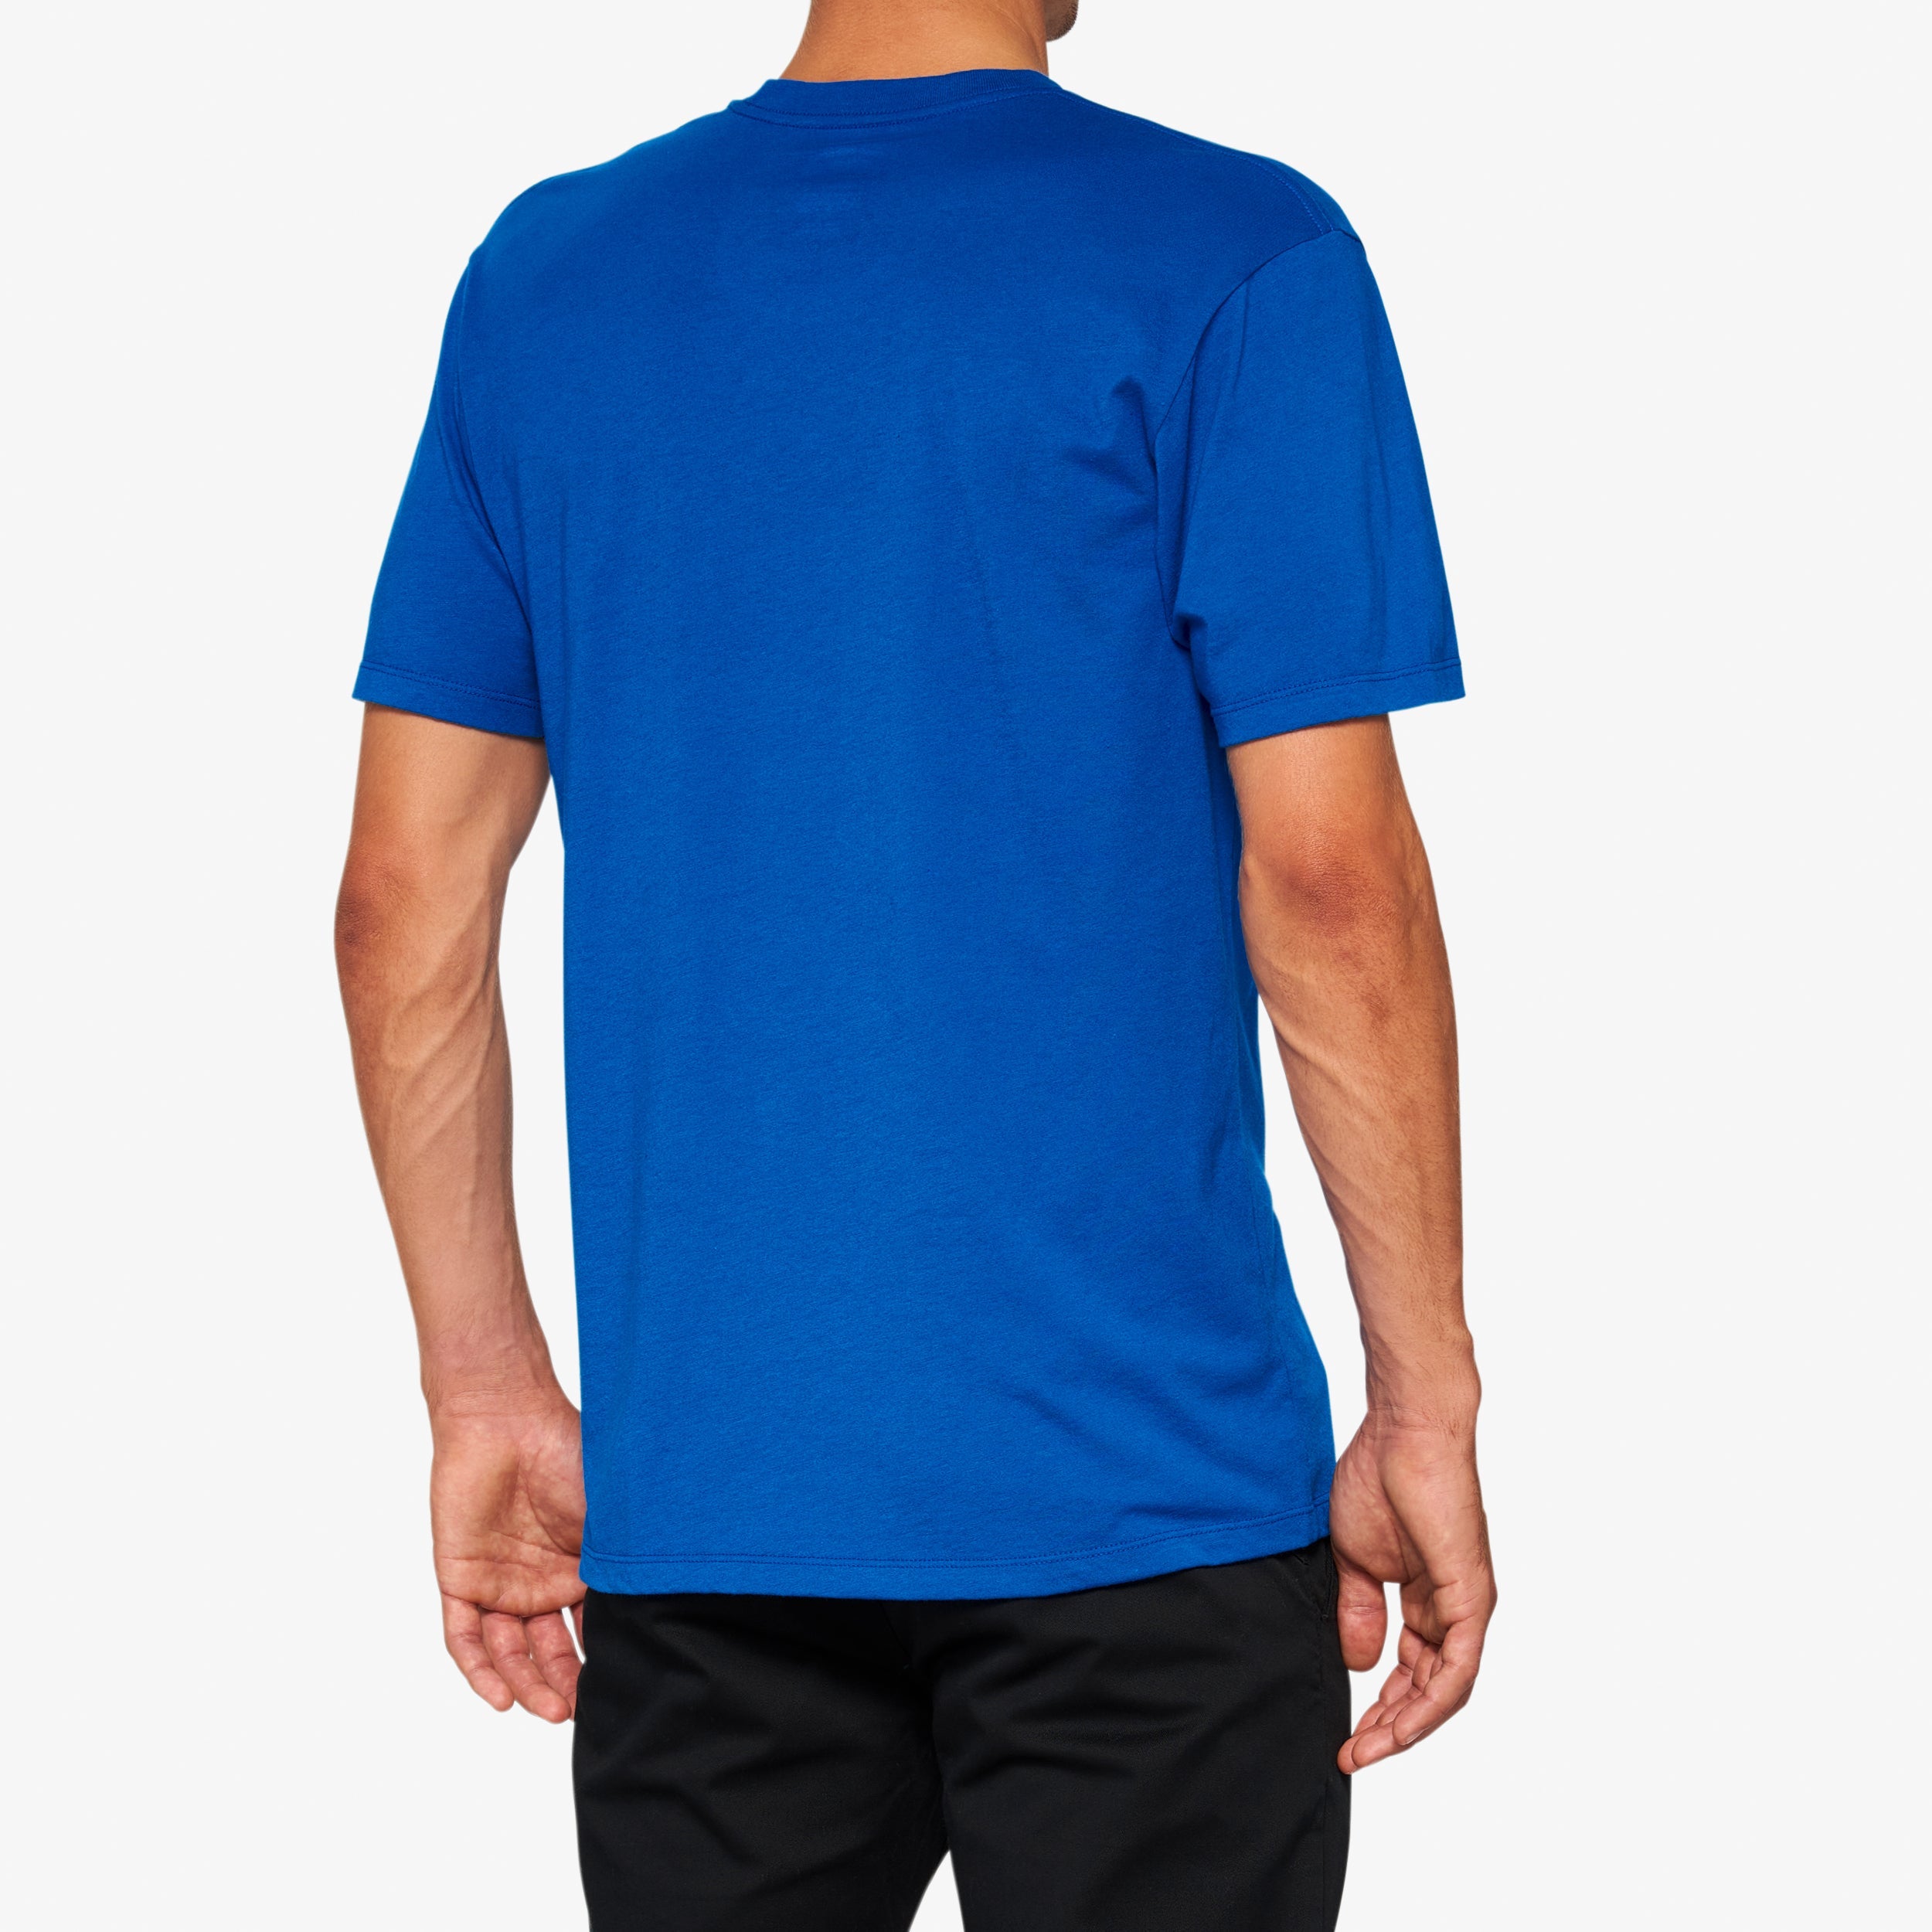 OFFICIAL Short Sleeve Tee Royal - Secondary